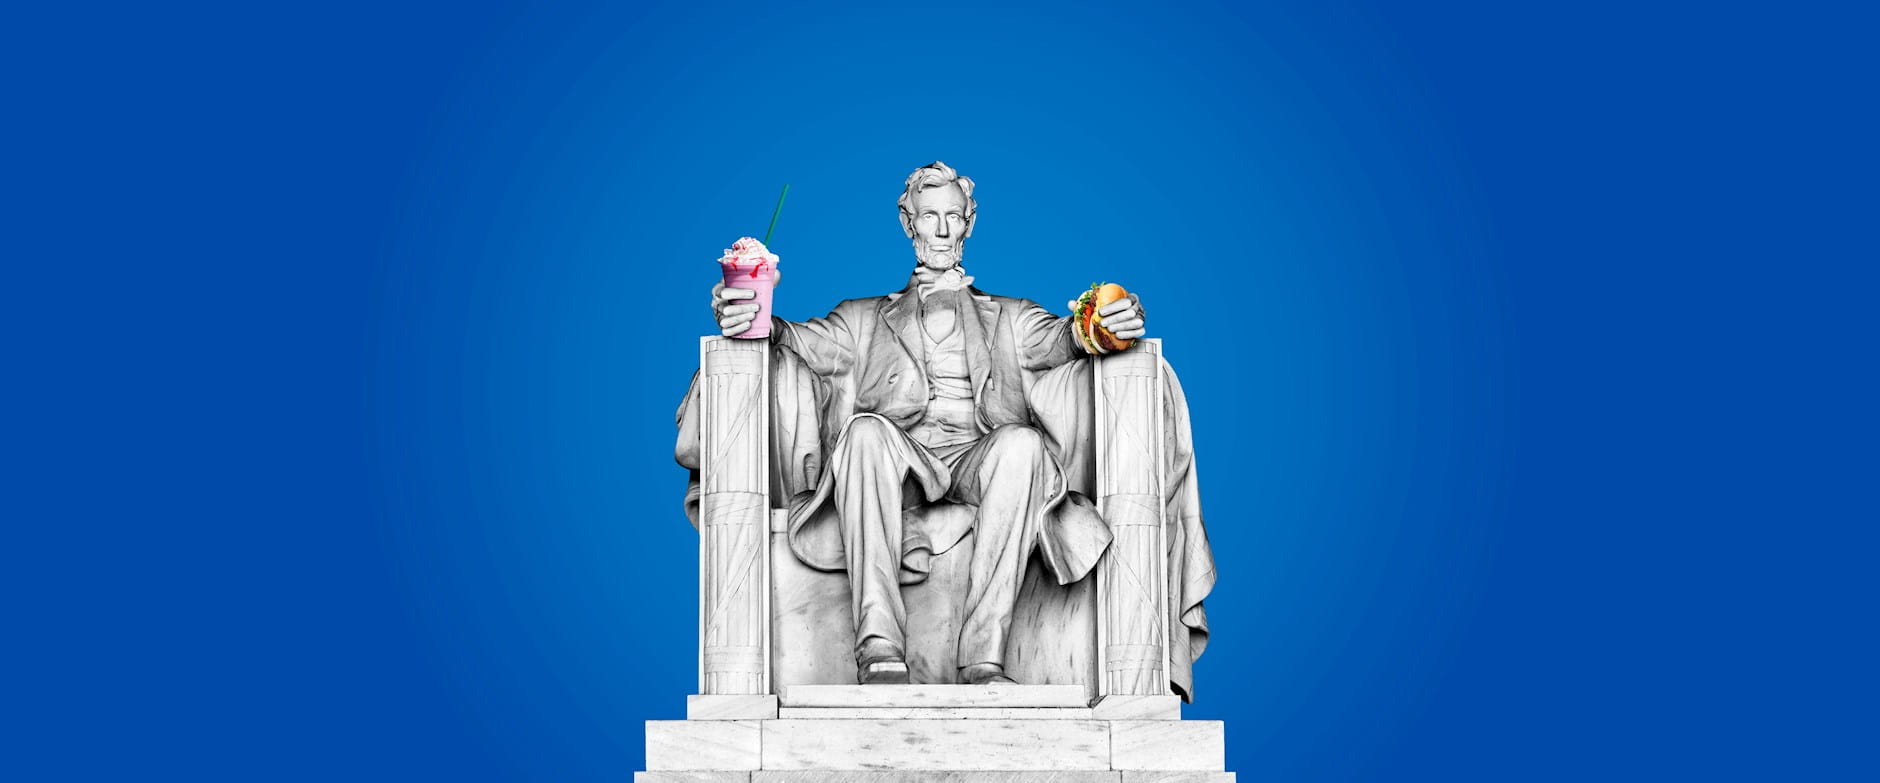 Lincoln Memorial holding junk food